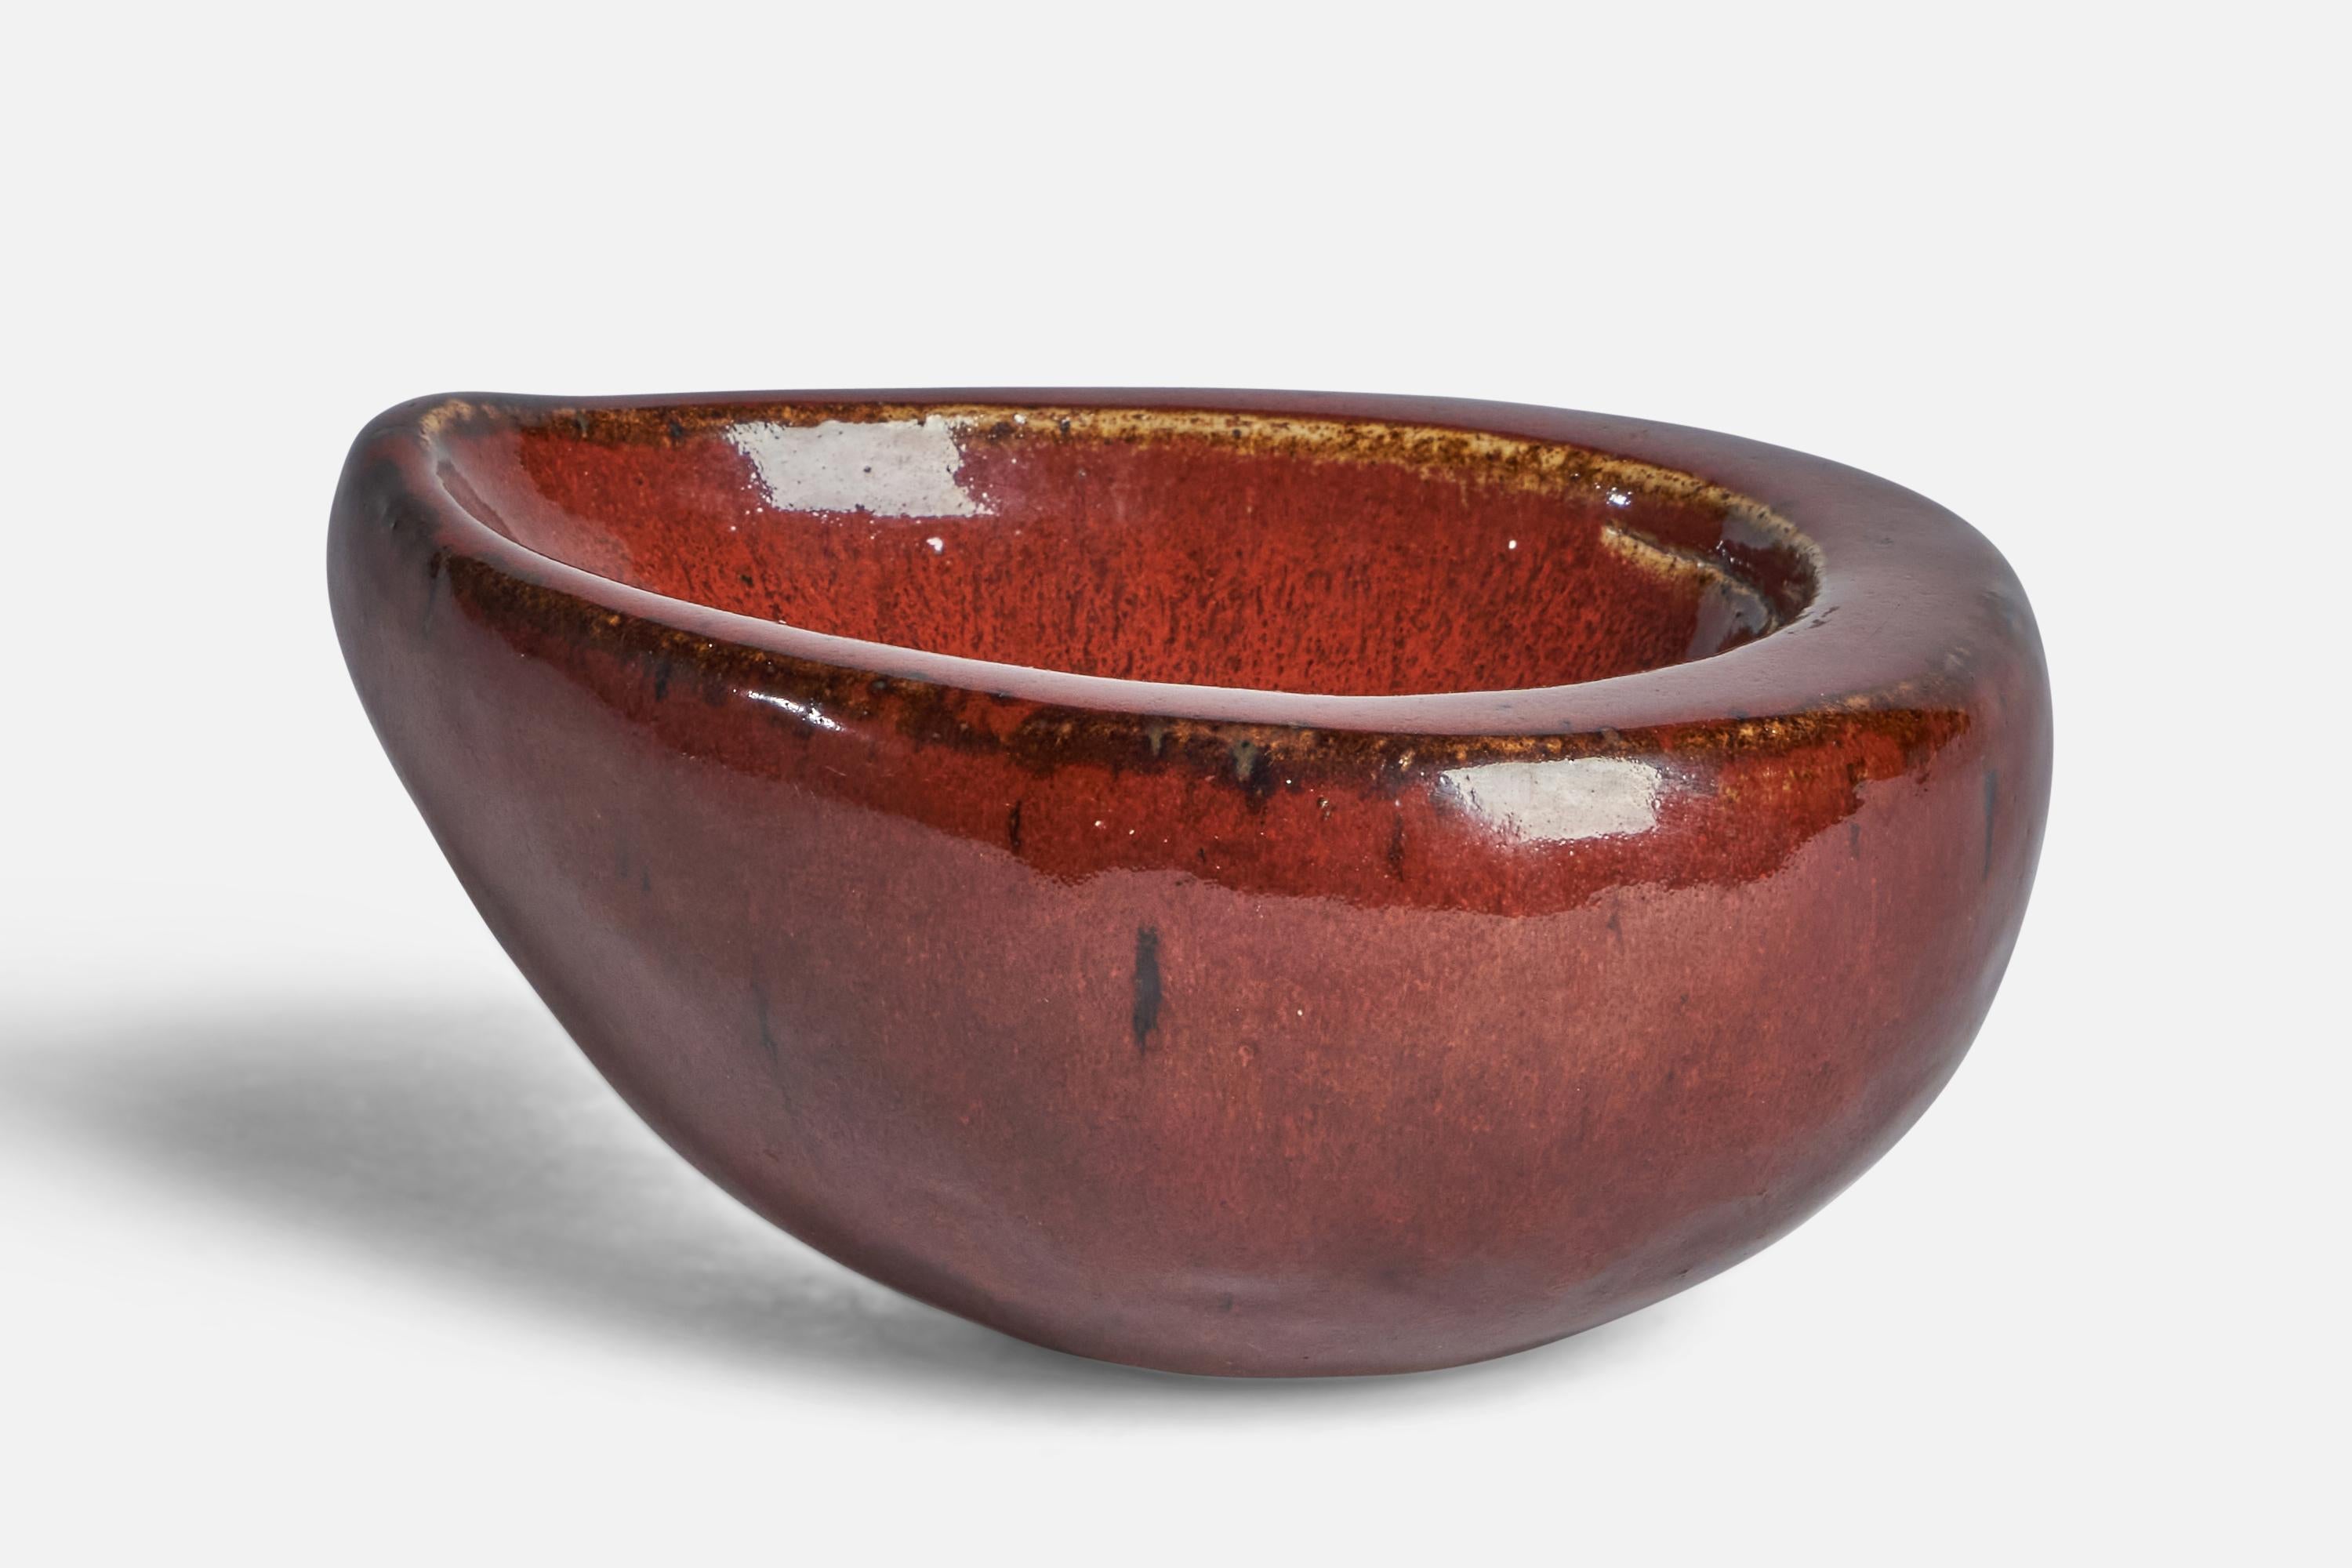 A red-glazed stoneware bowl designed by Agnete Jørgensen and produced by Bing & Grøndahl, 1960s.